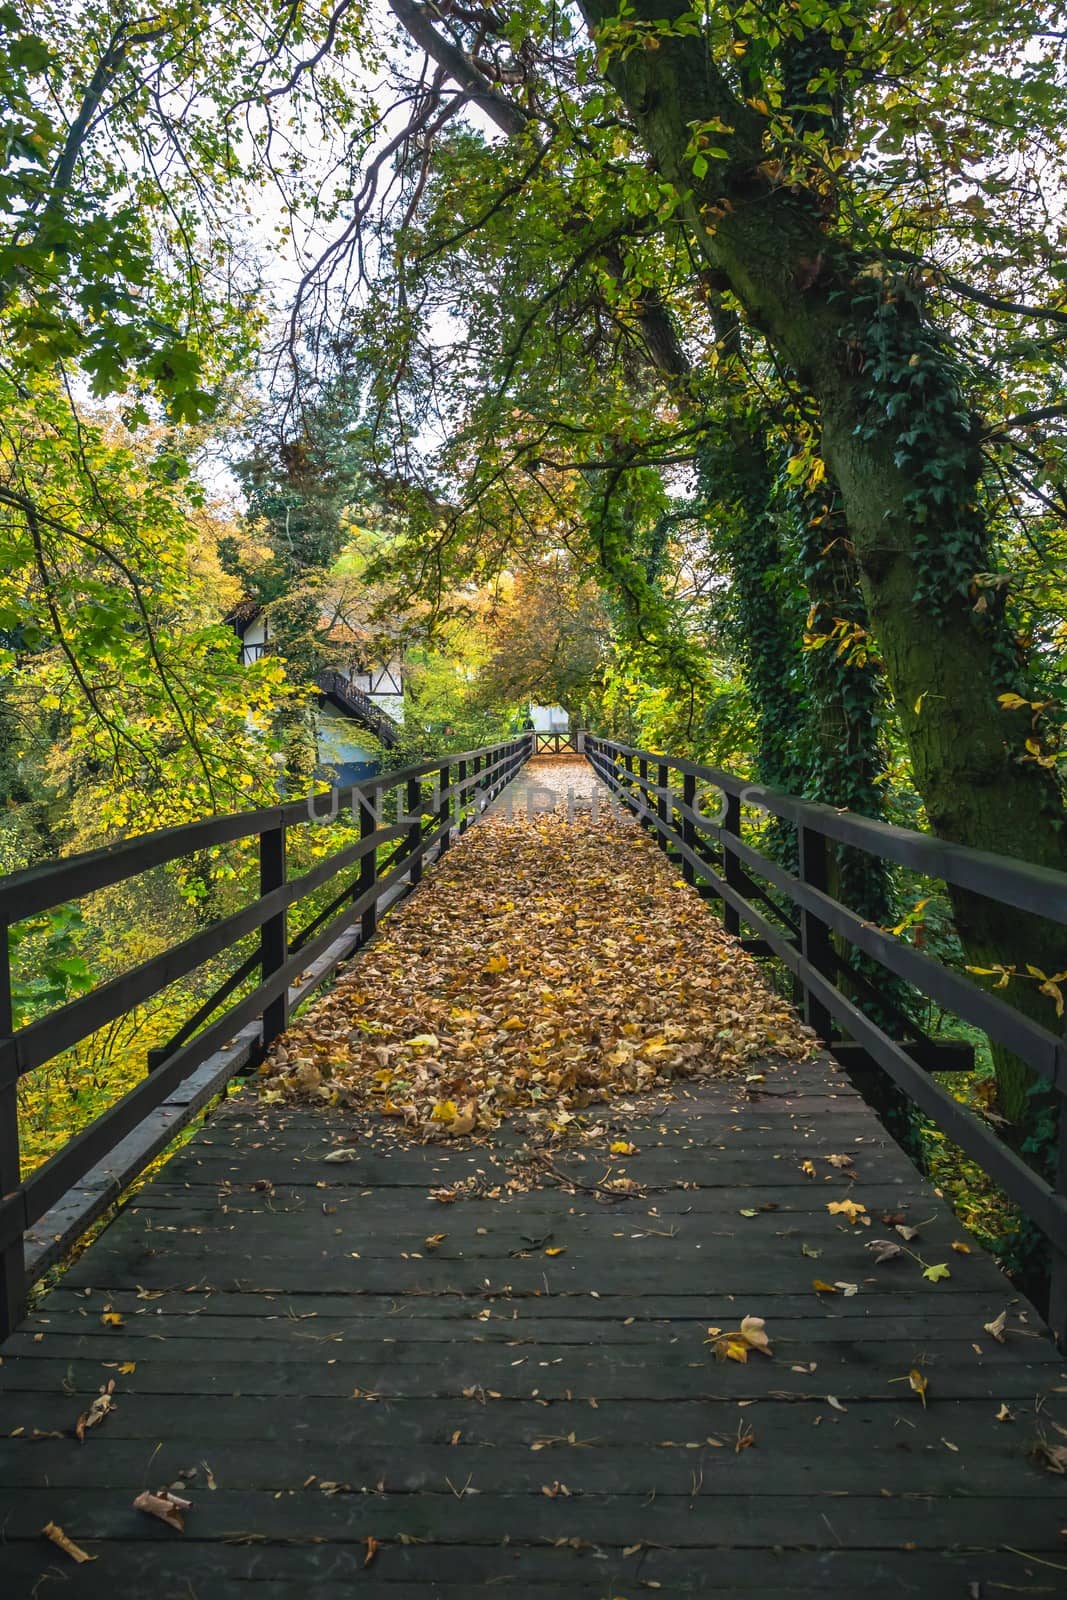 Historic wooden bridge in a park surrounded by autumn colors in a foggy morning